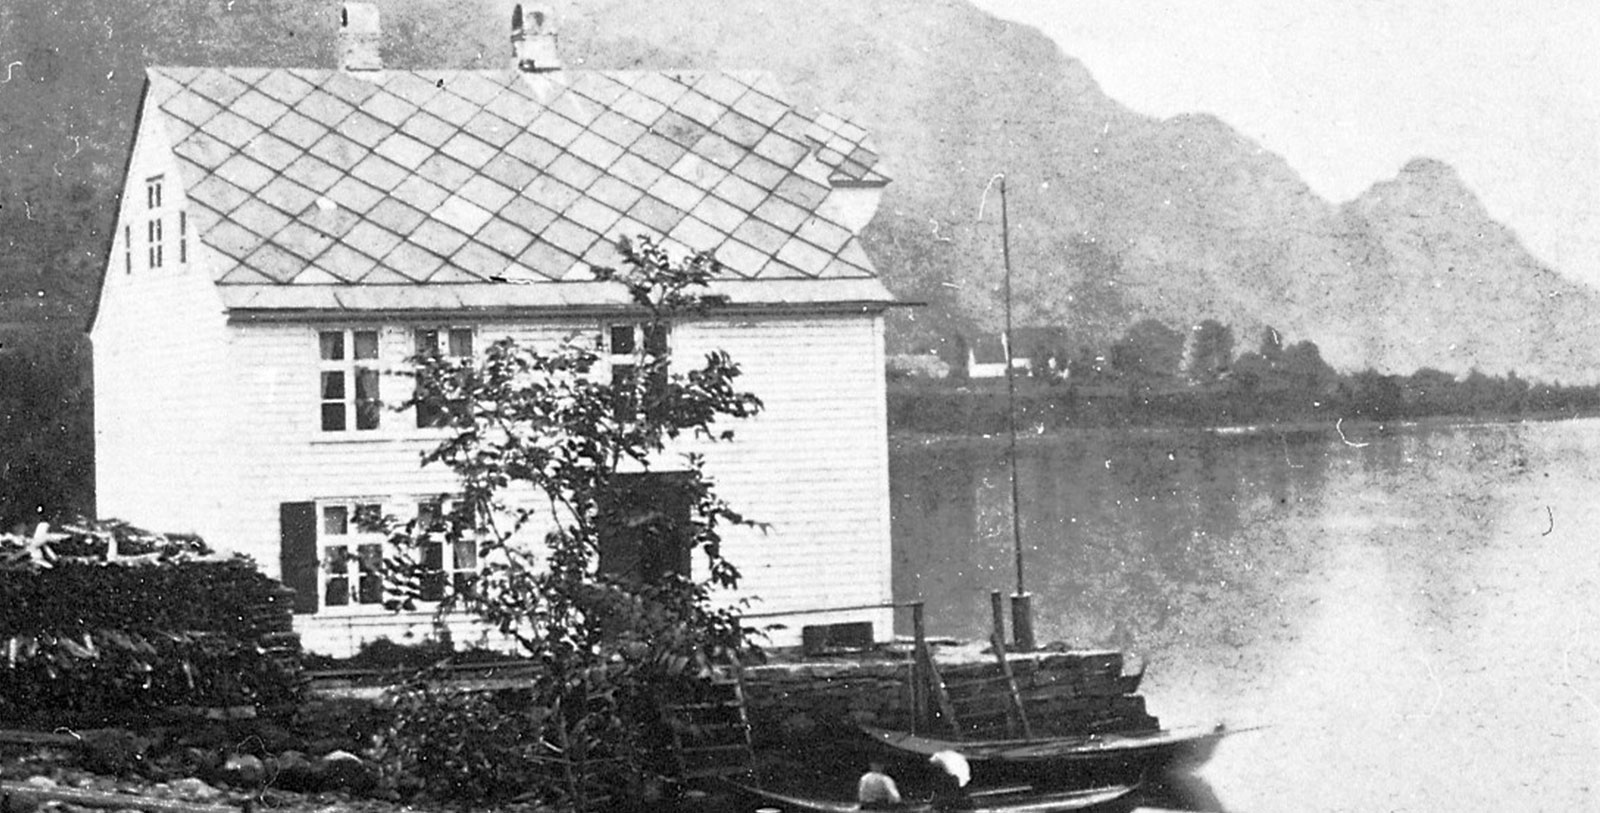 Image of Historic hotel exterior, Hotel Ullensvang, Lofthus, Norway, 1846, Member of Historic Hotels Worldwide, Discover